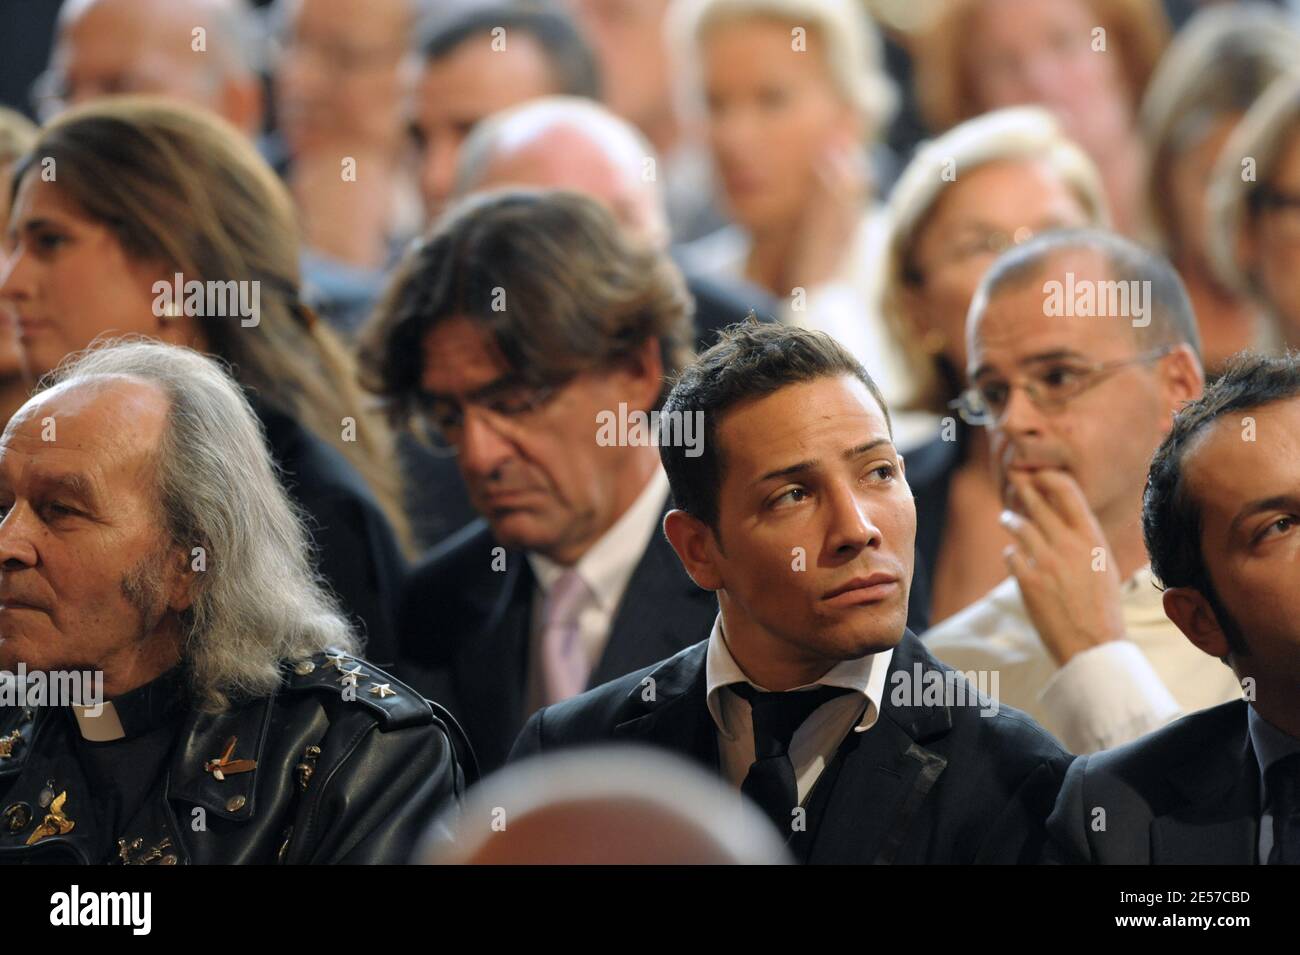 (L to R) Priest Guy Gilbert, Luc Ferry and Steevy Boulay attending the speech of Pope Benedict XVI at the Elysee Palace in Paris, France, on September 12, 2008. Photo by Abd Rabbo-Mousse-Orban-Taamallah/ABACAPRESS.COM Stock Photo